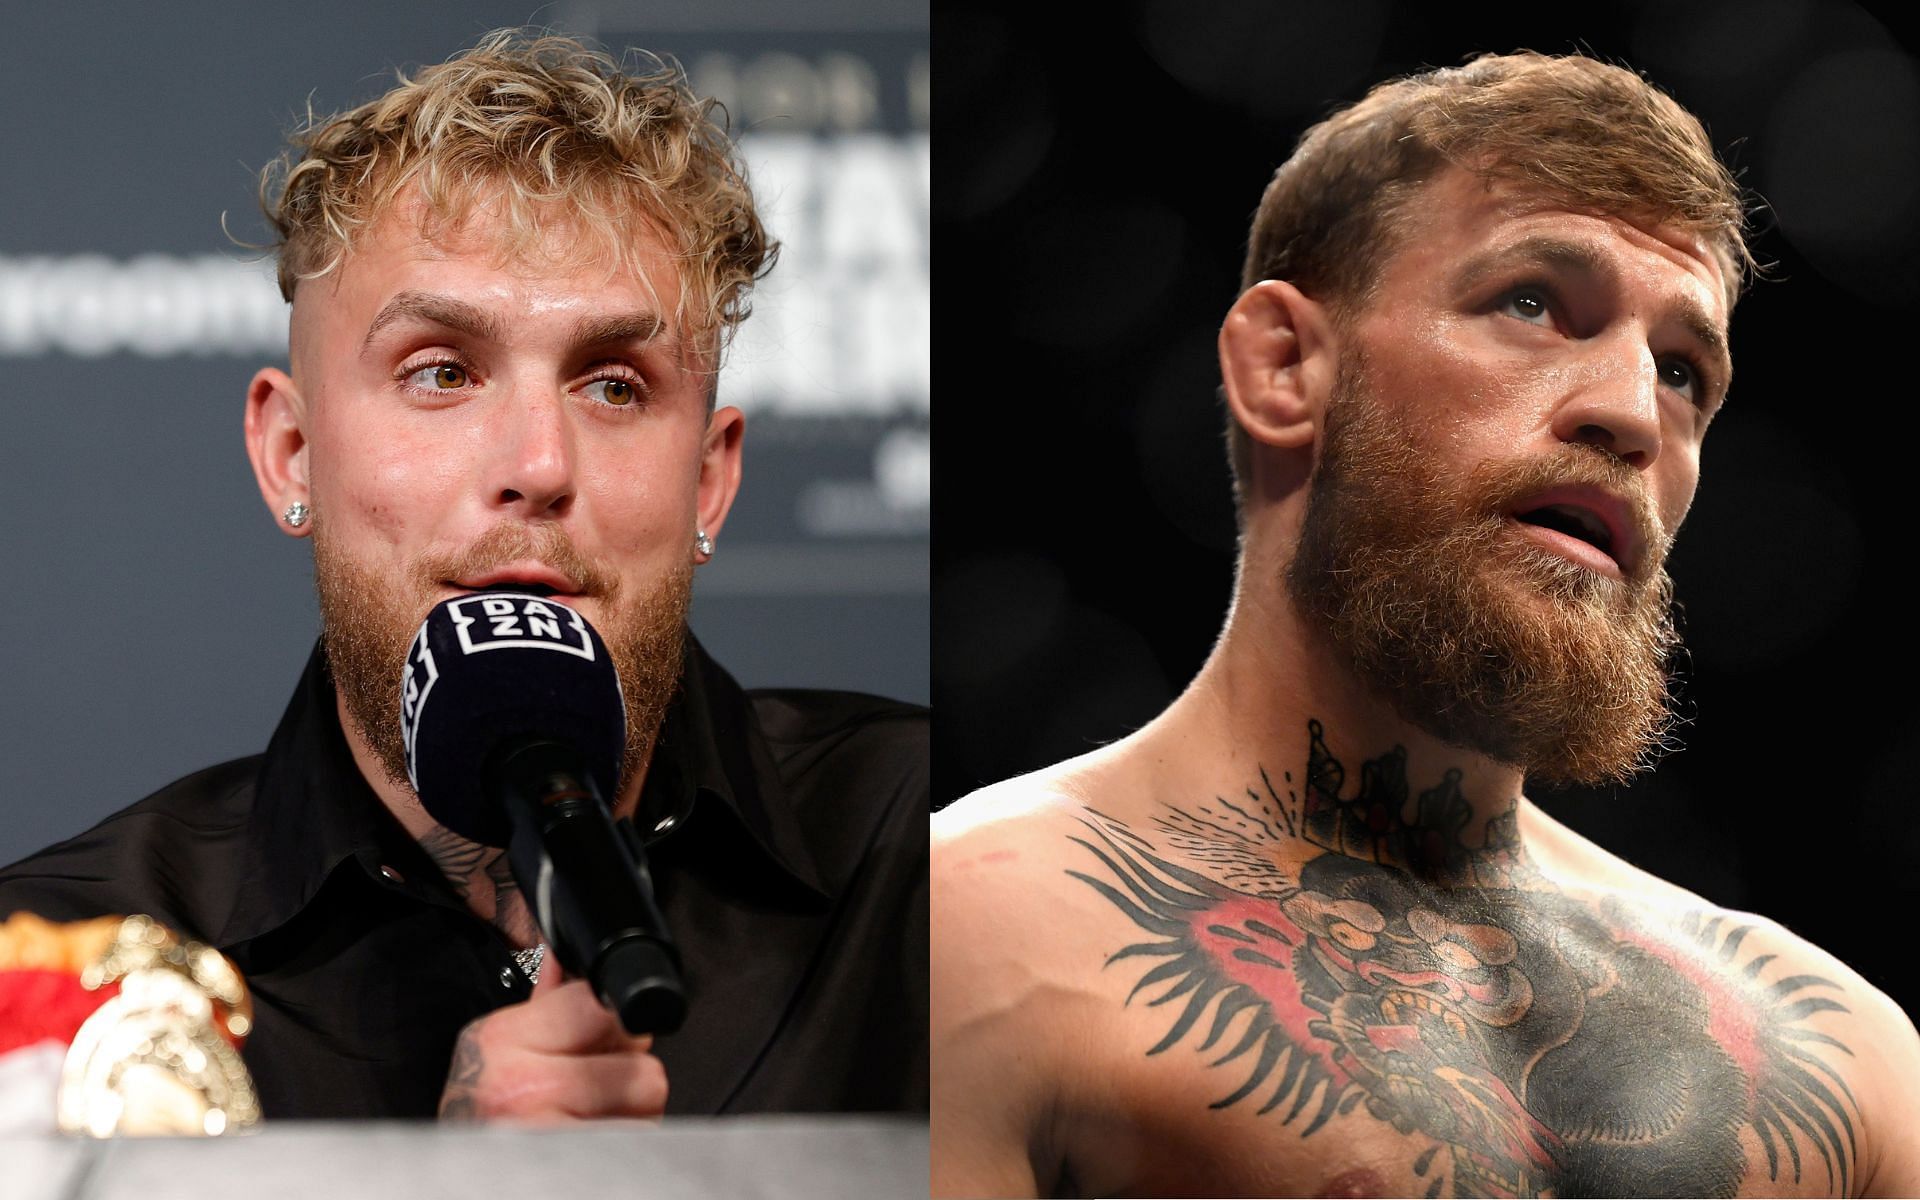 Jake Paul (left) and Conor McGregor (right). [via Getty Images]